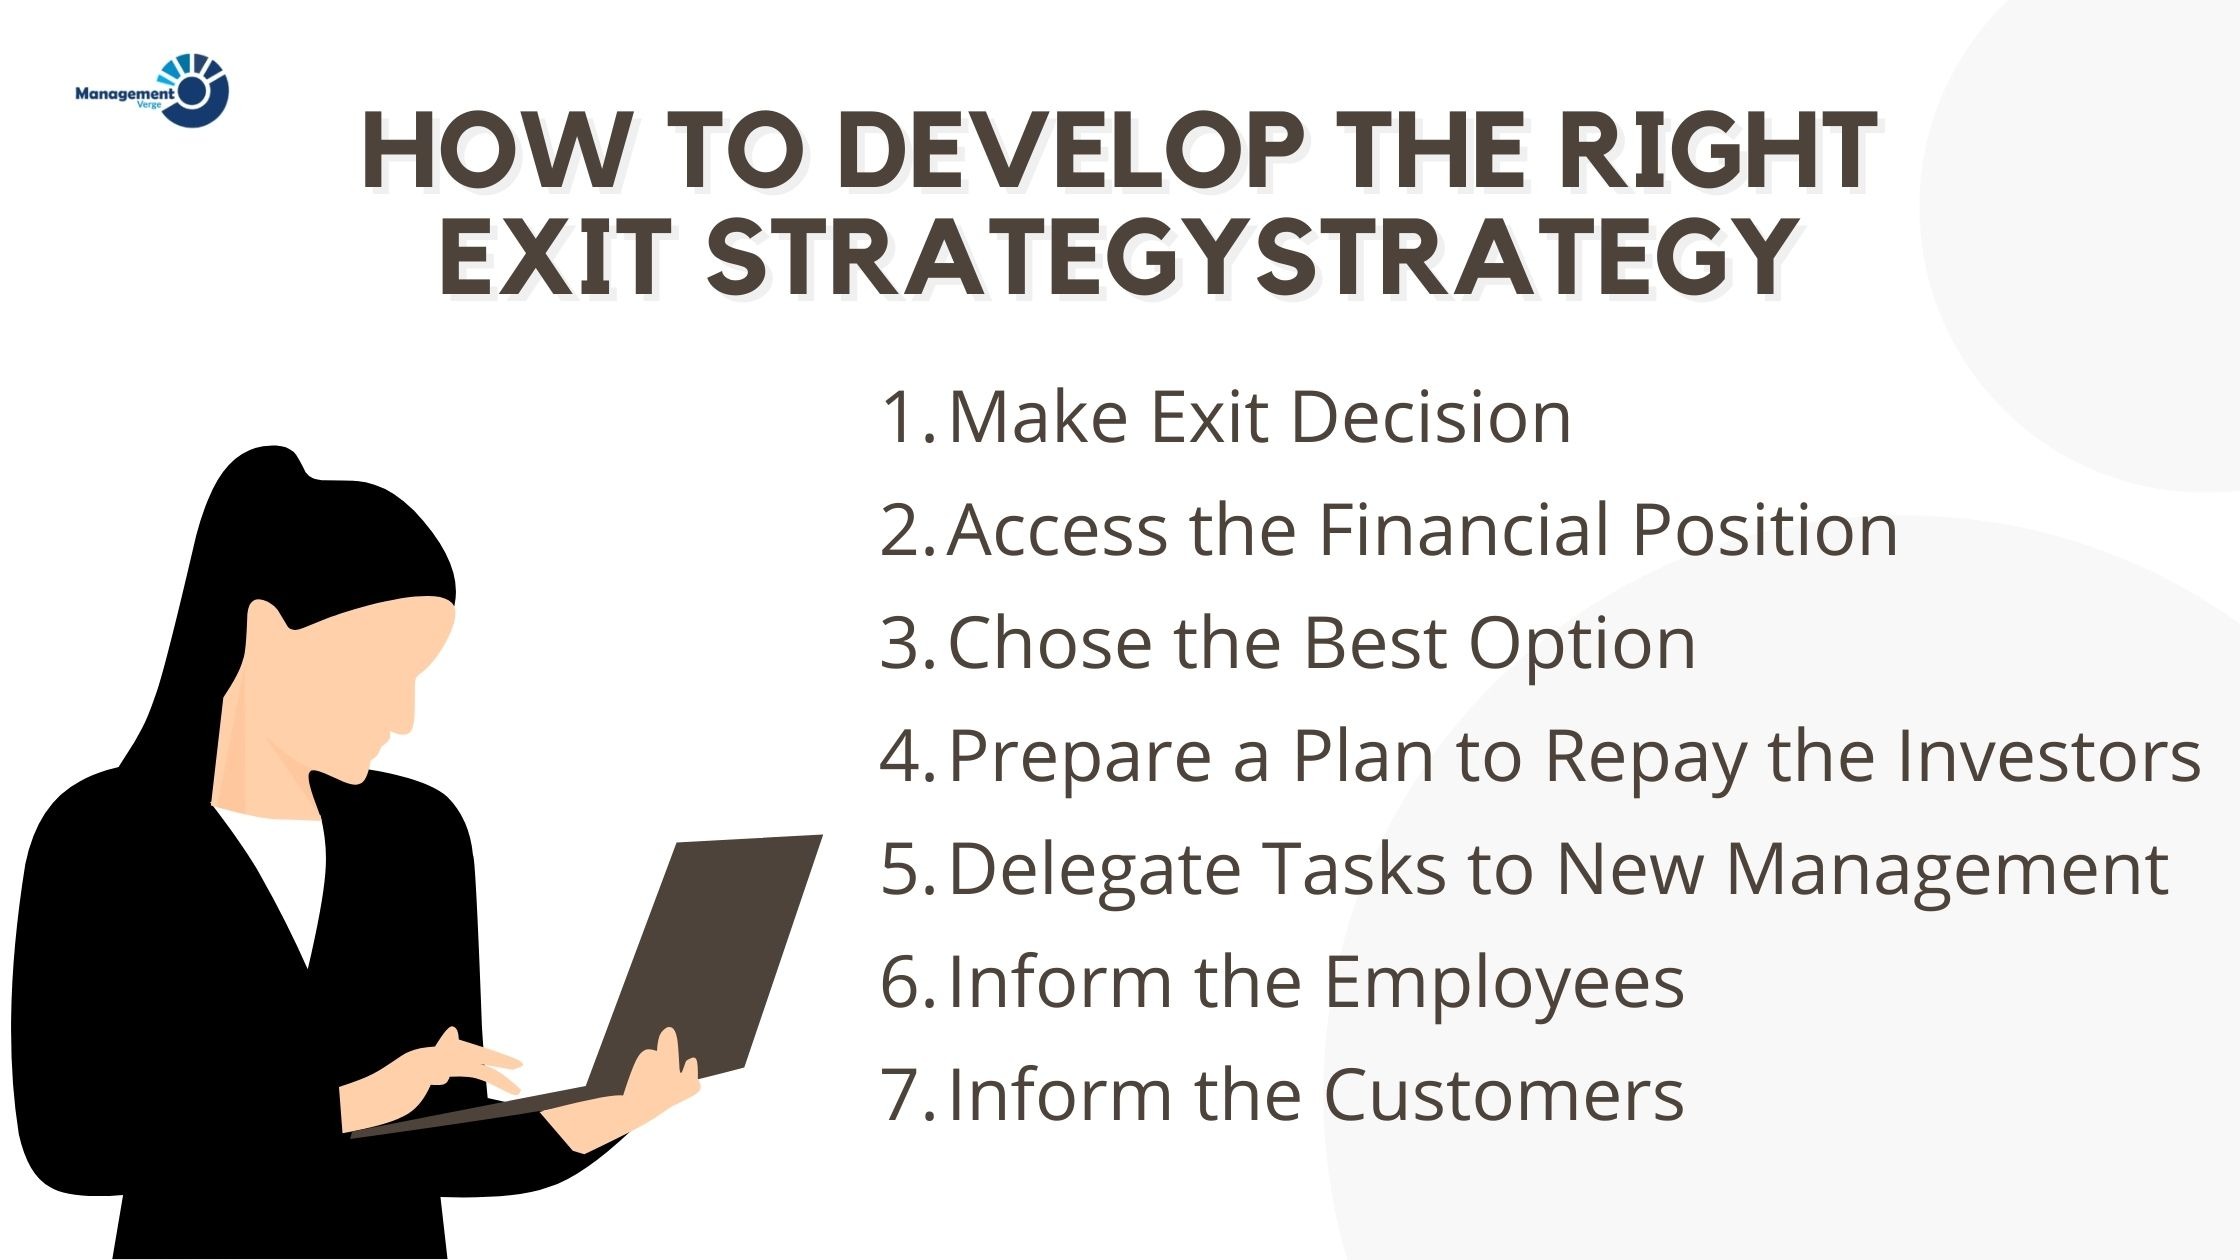 How to Develop the Right Exit Strategy